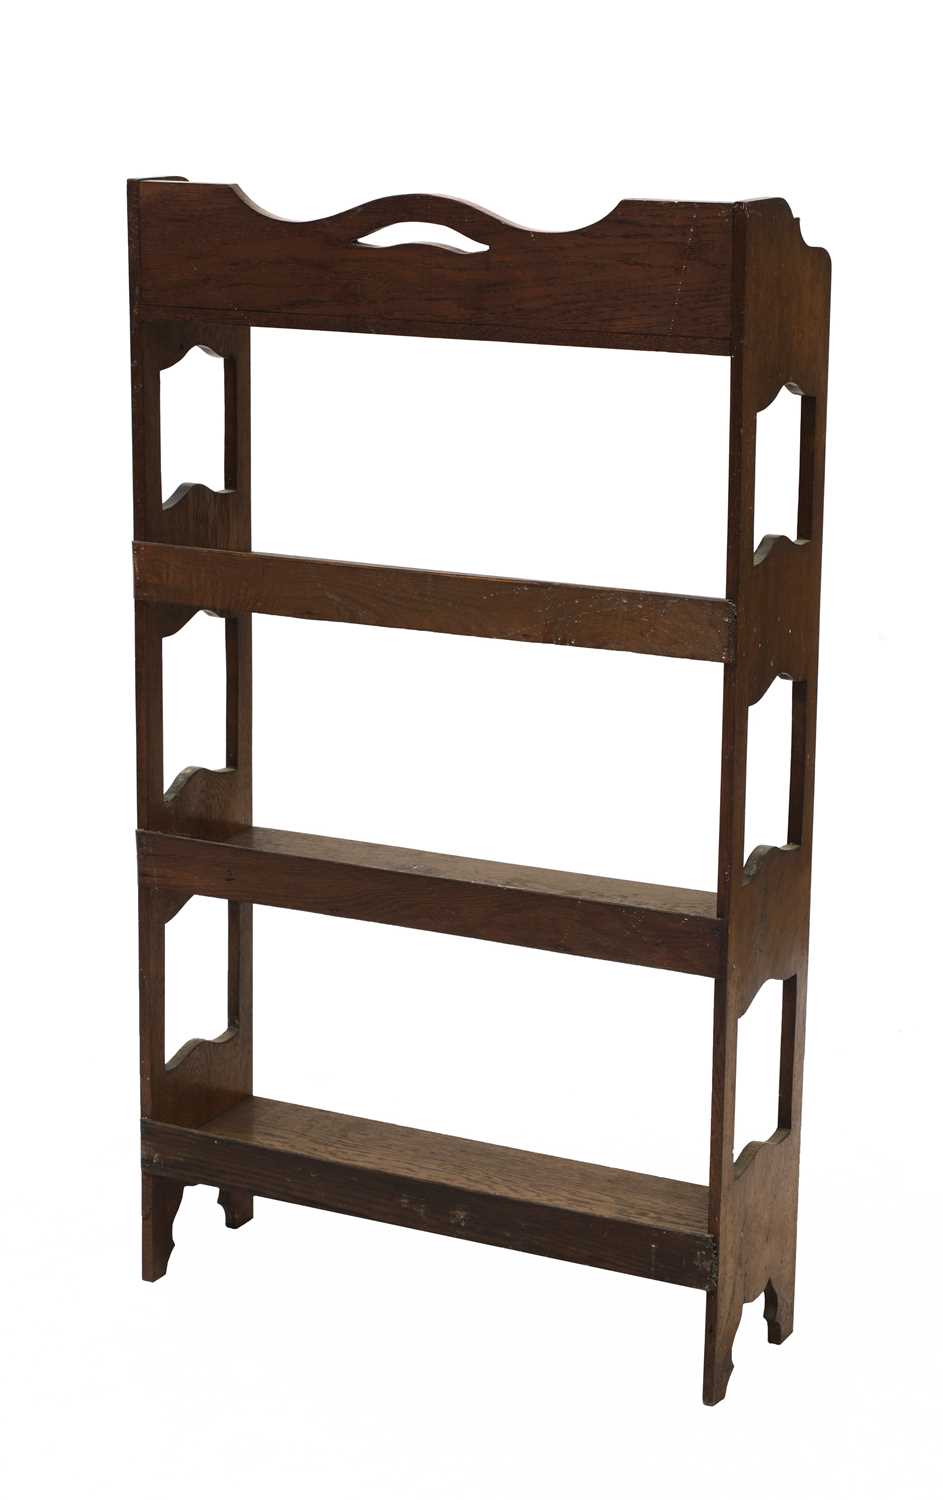 An Arts and Crafts oak free-standing set of shelves, - Image 2 of 2